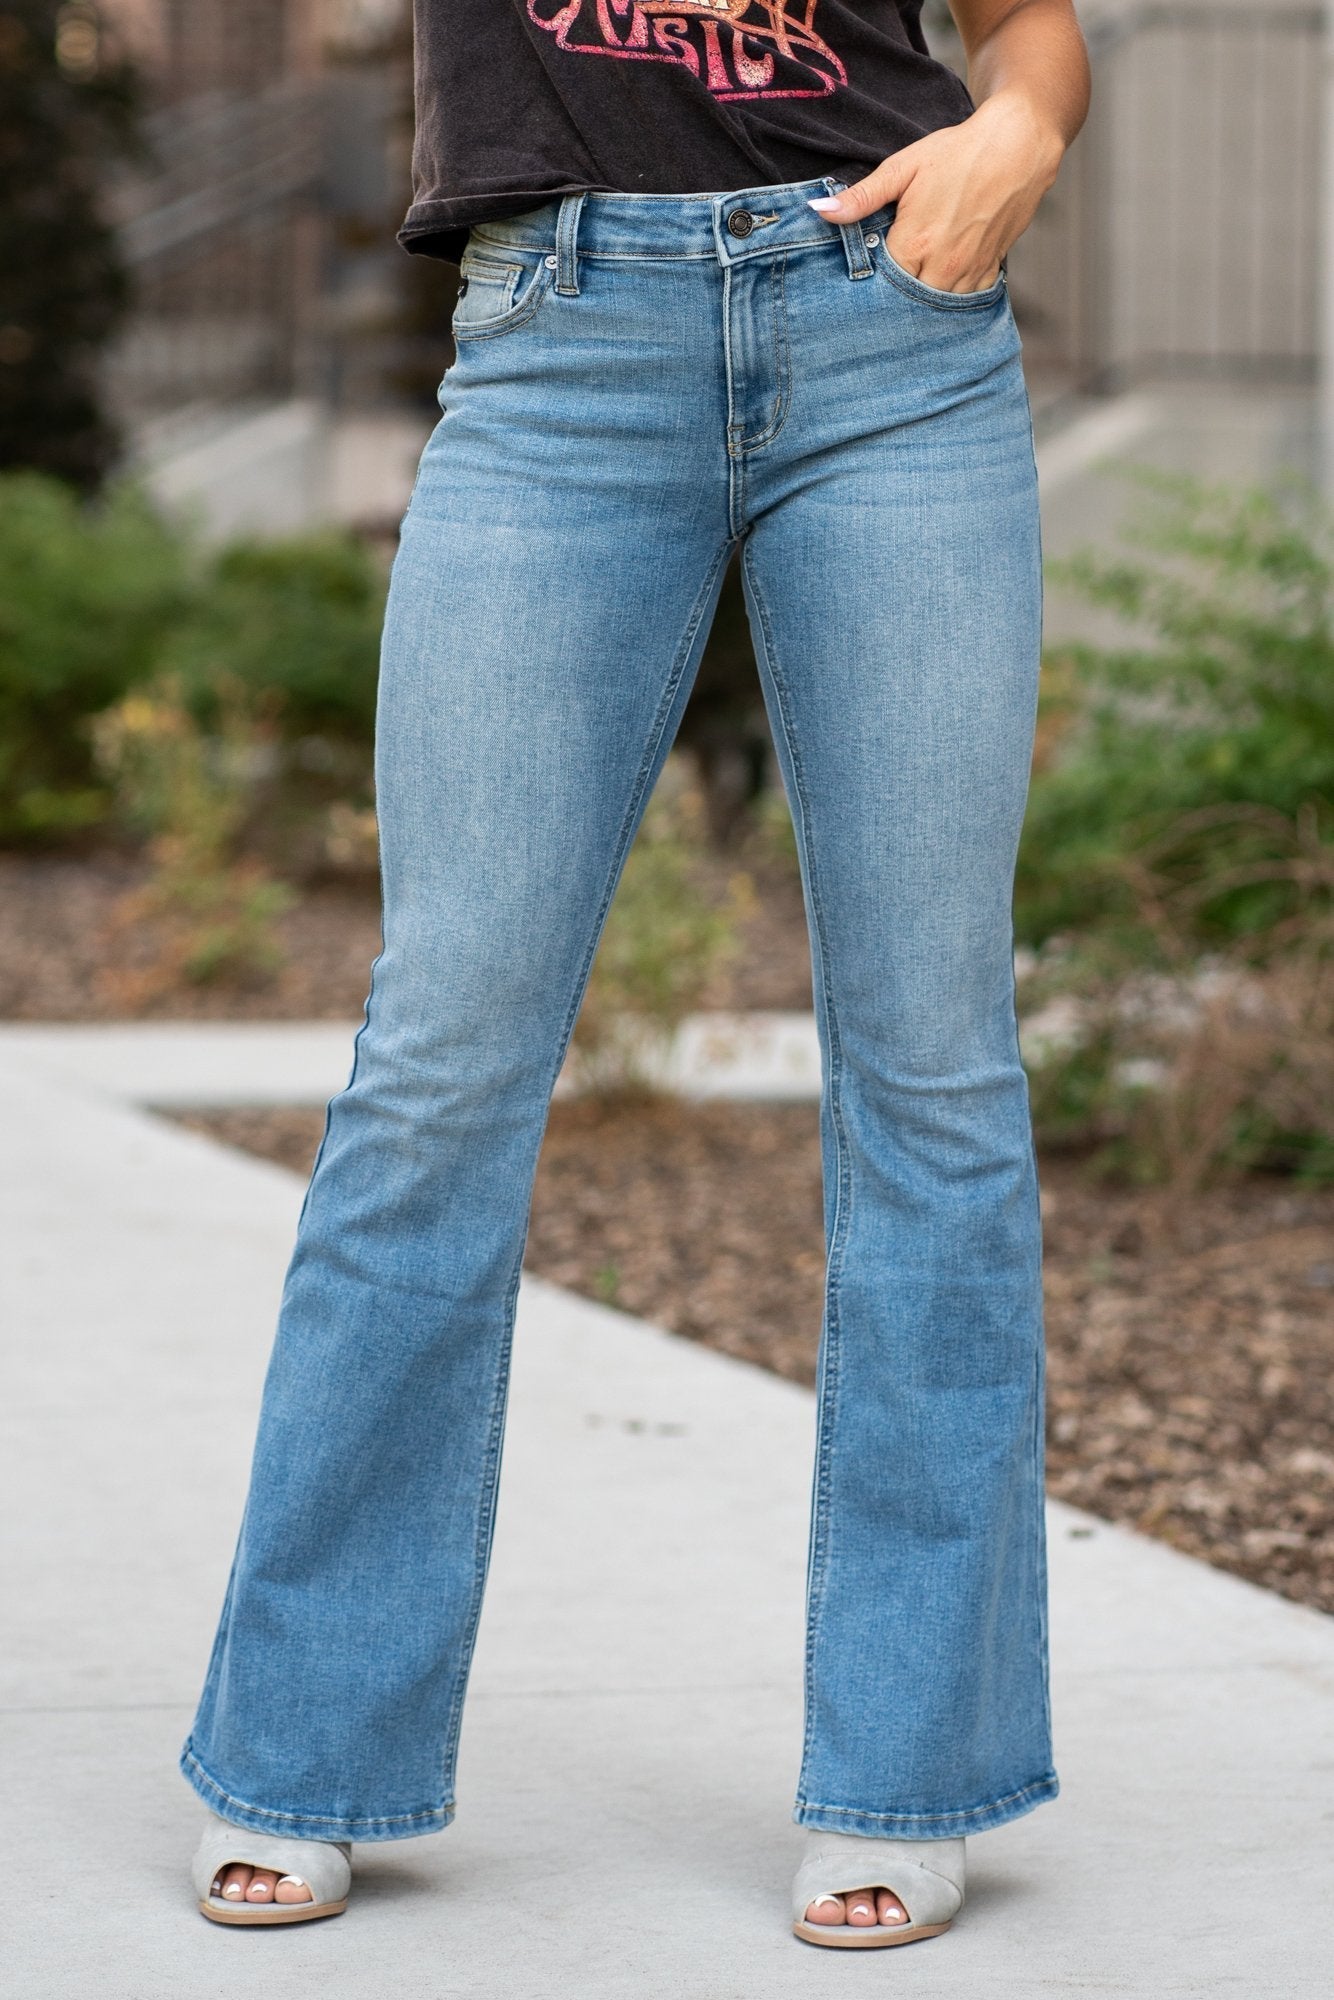 DOs & DON'Ts of styling flare jeans.